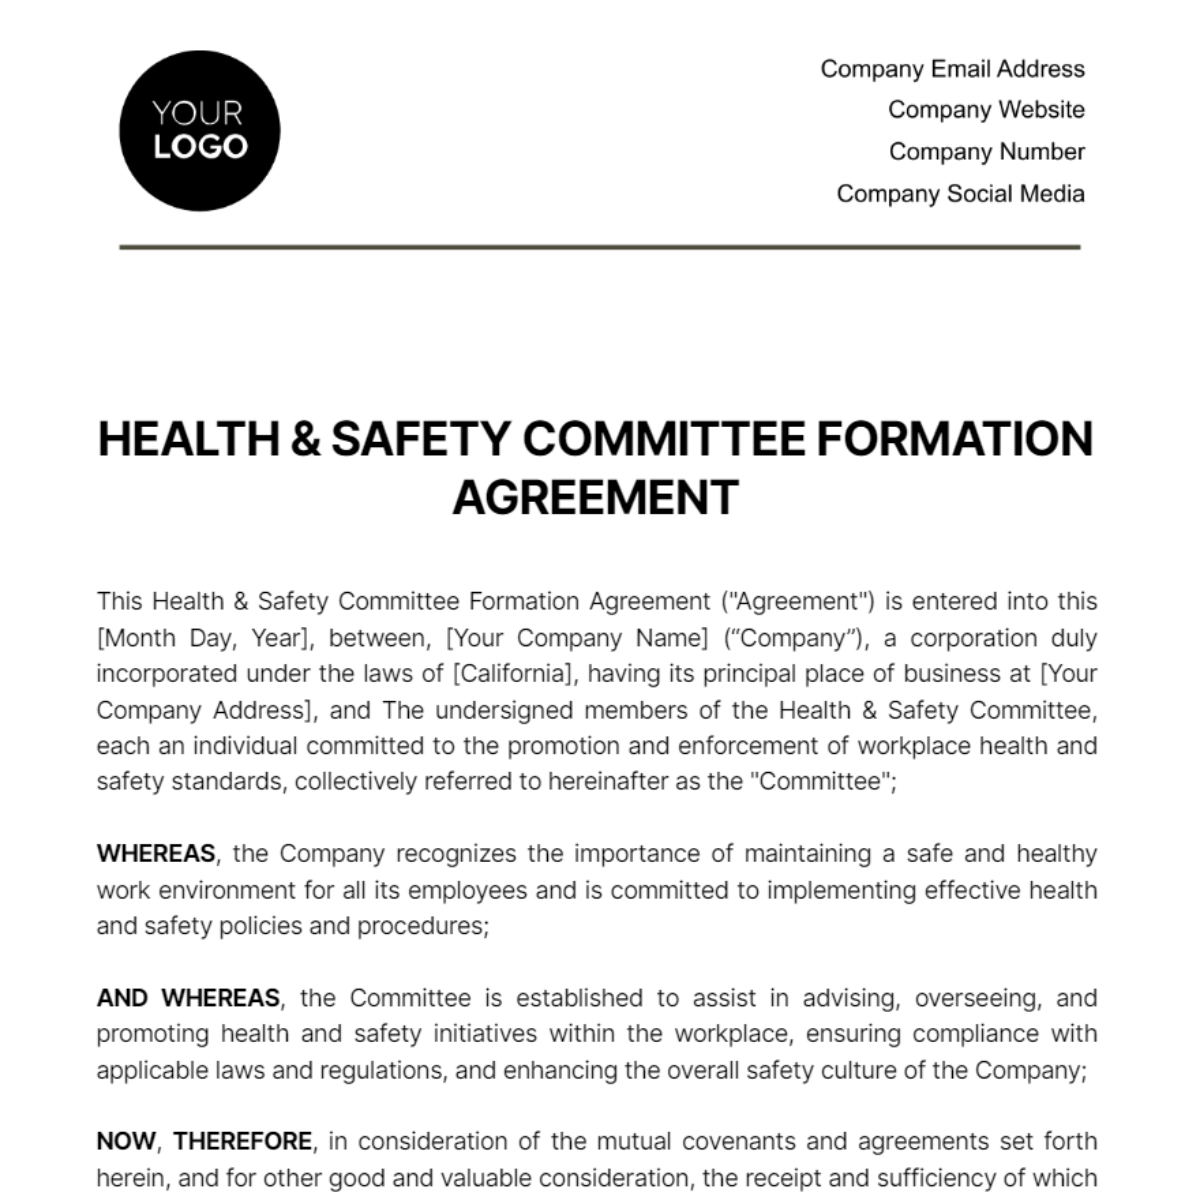 Health & Safety Committee Formation Agreement Template